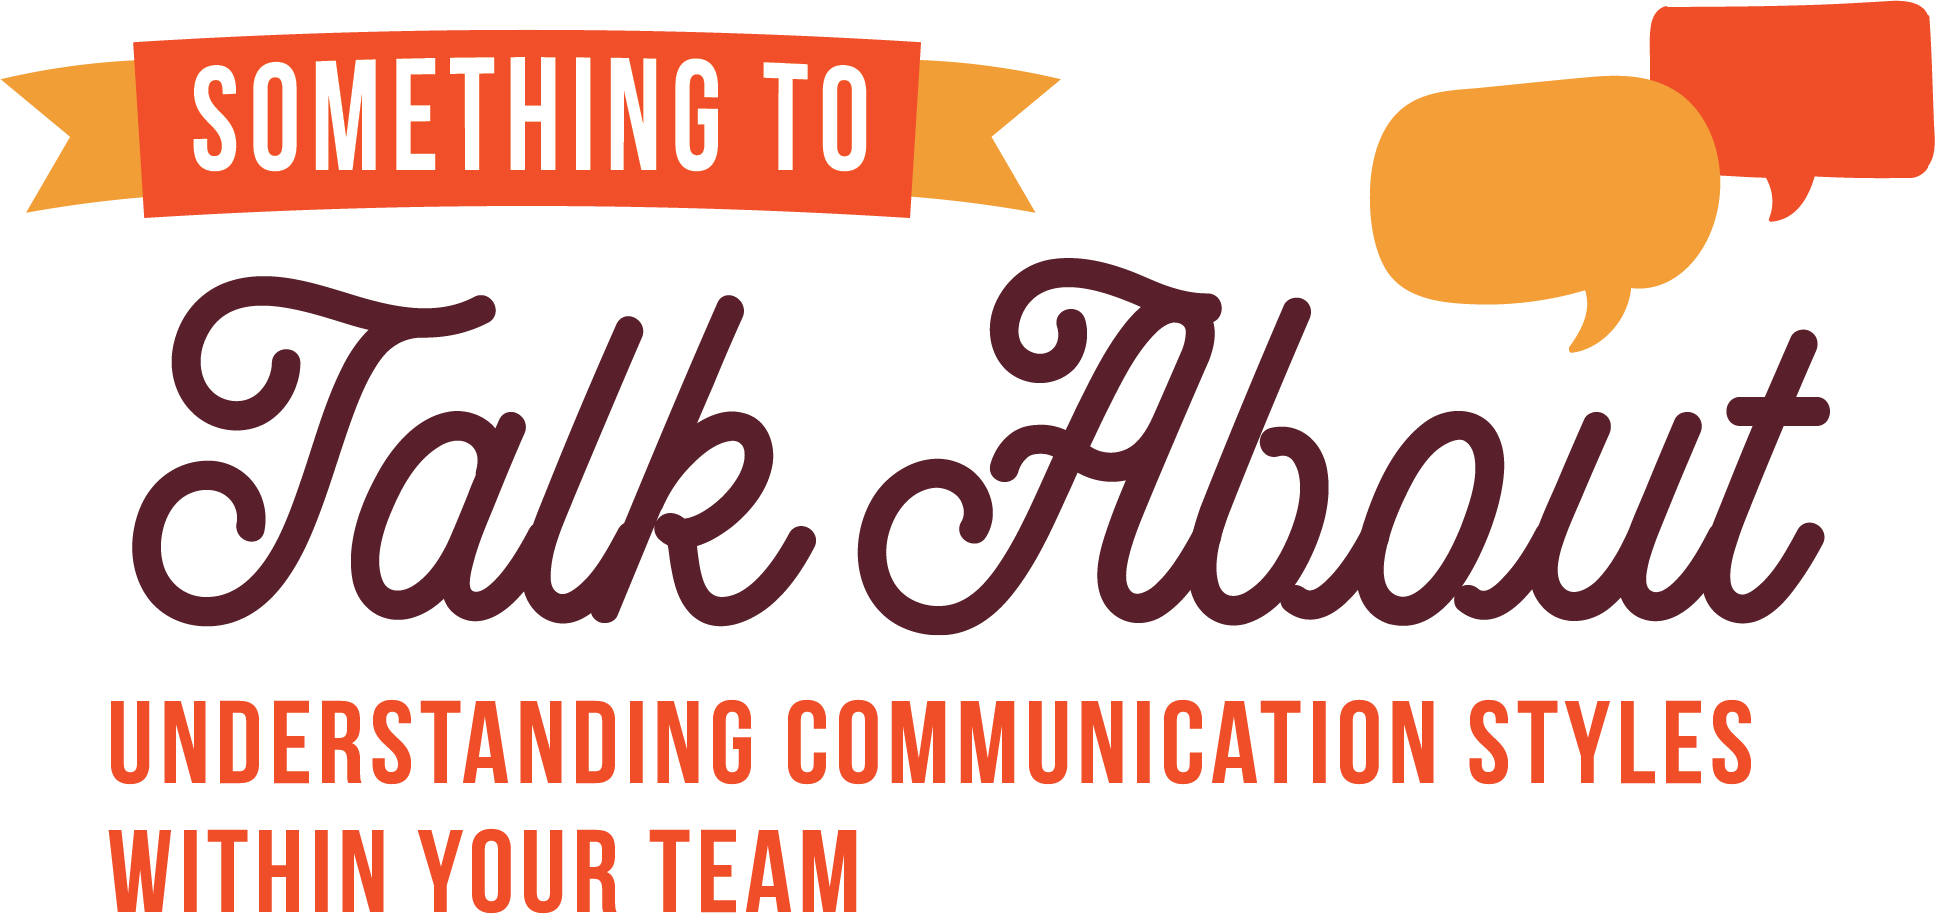 Something to Talk About: Understanding Communication Styles Within Your Team